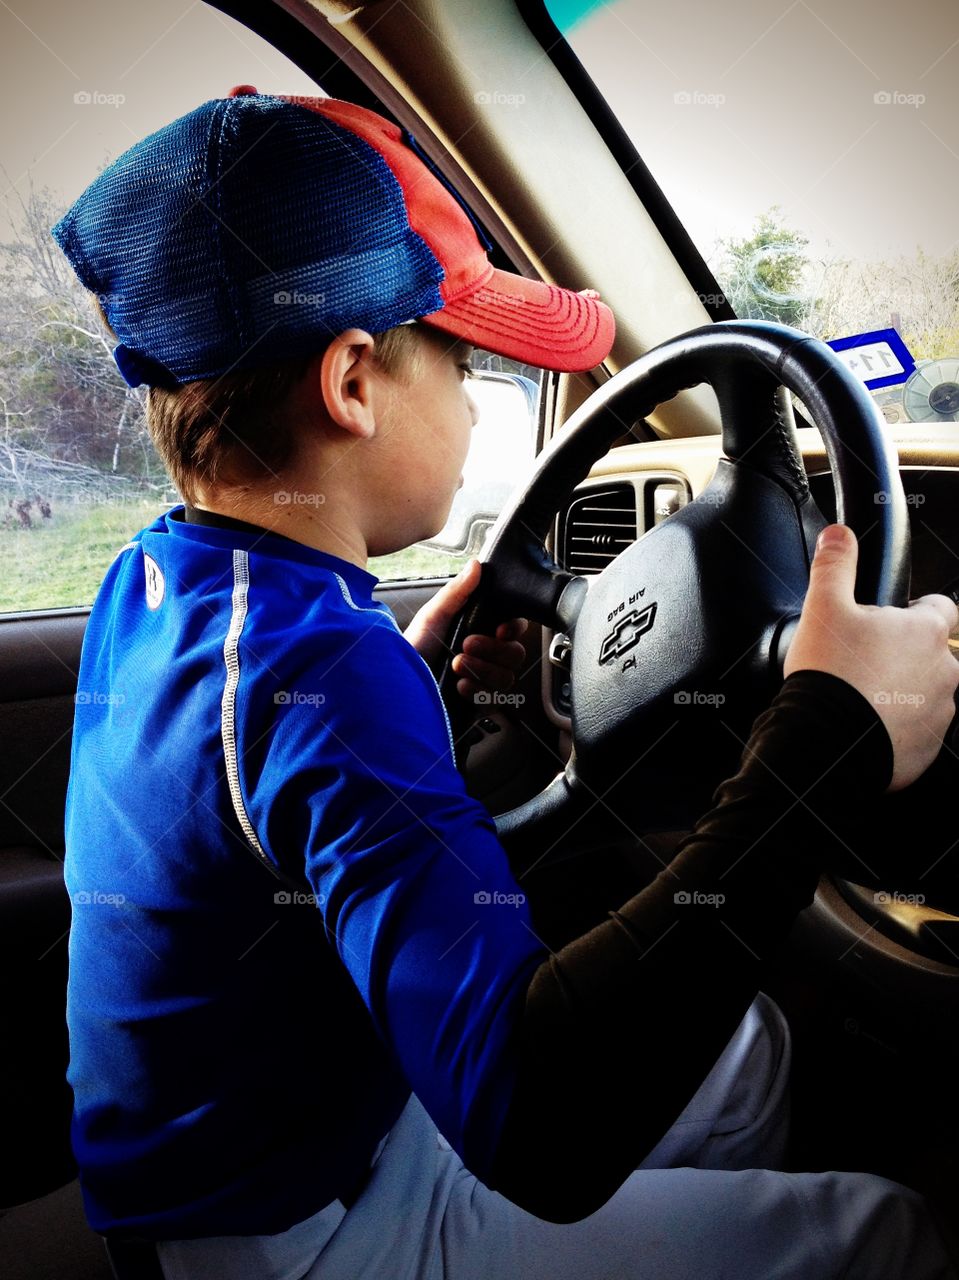 Young driver. 9 year old boy dreaming of driving his dad's truck